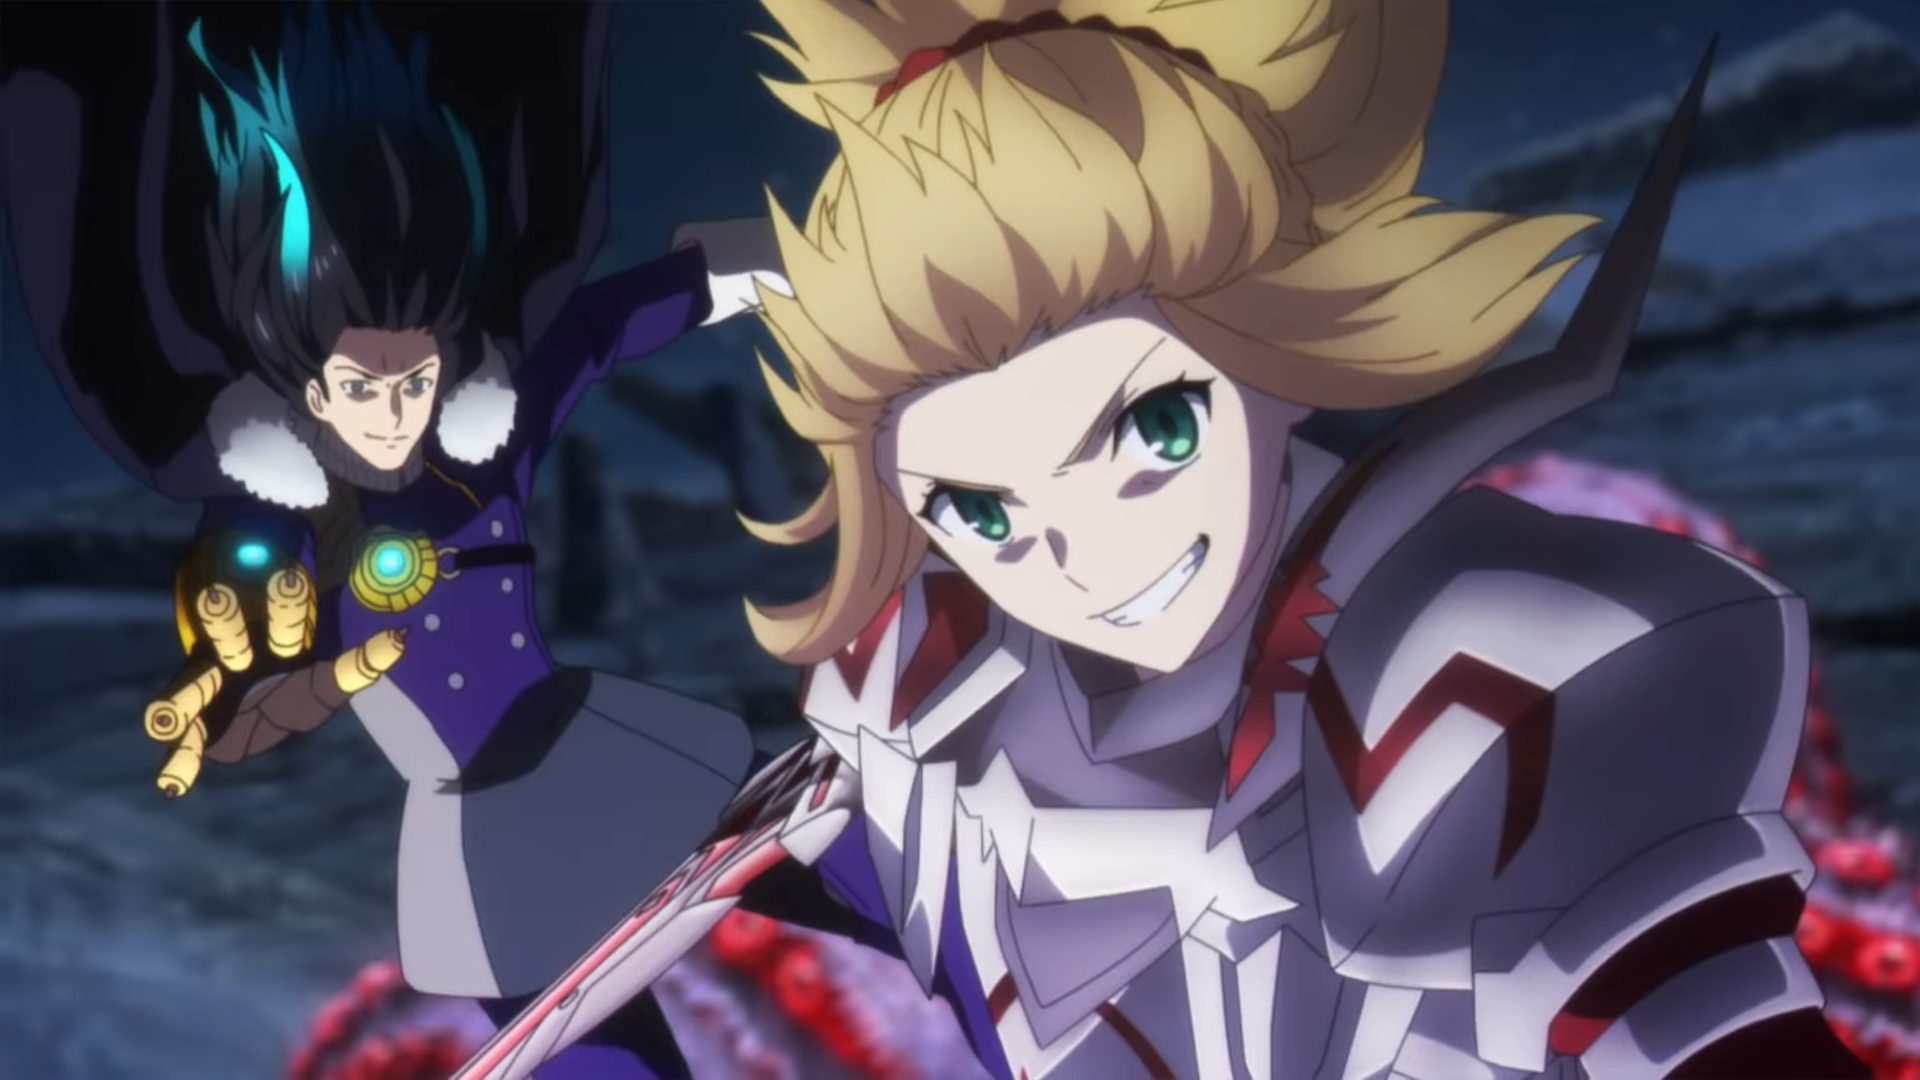 Knights arrive in the new Fate / Grand Order film